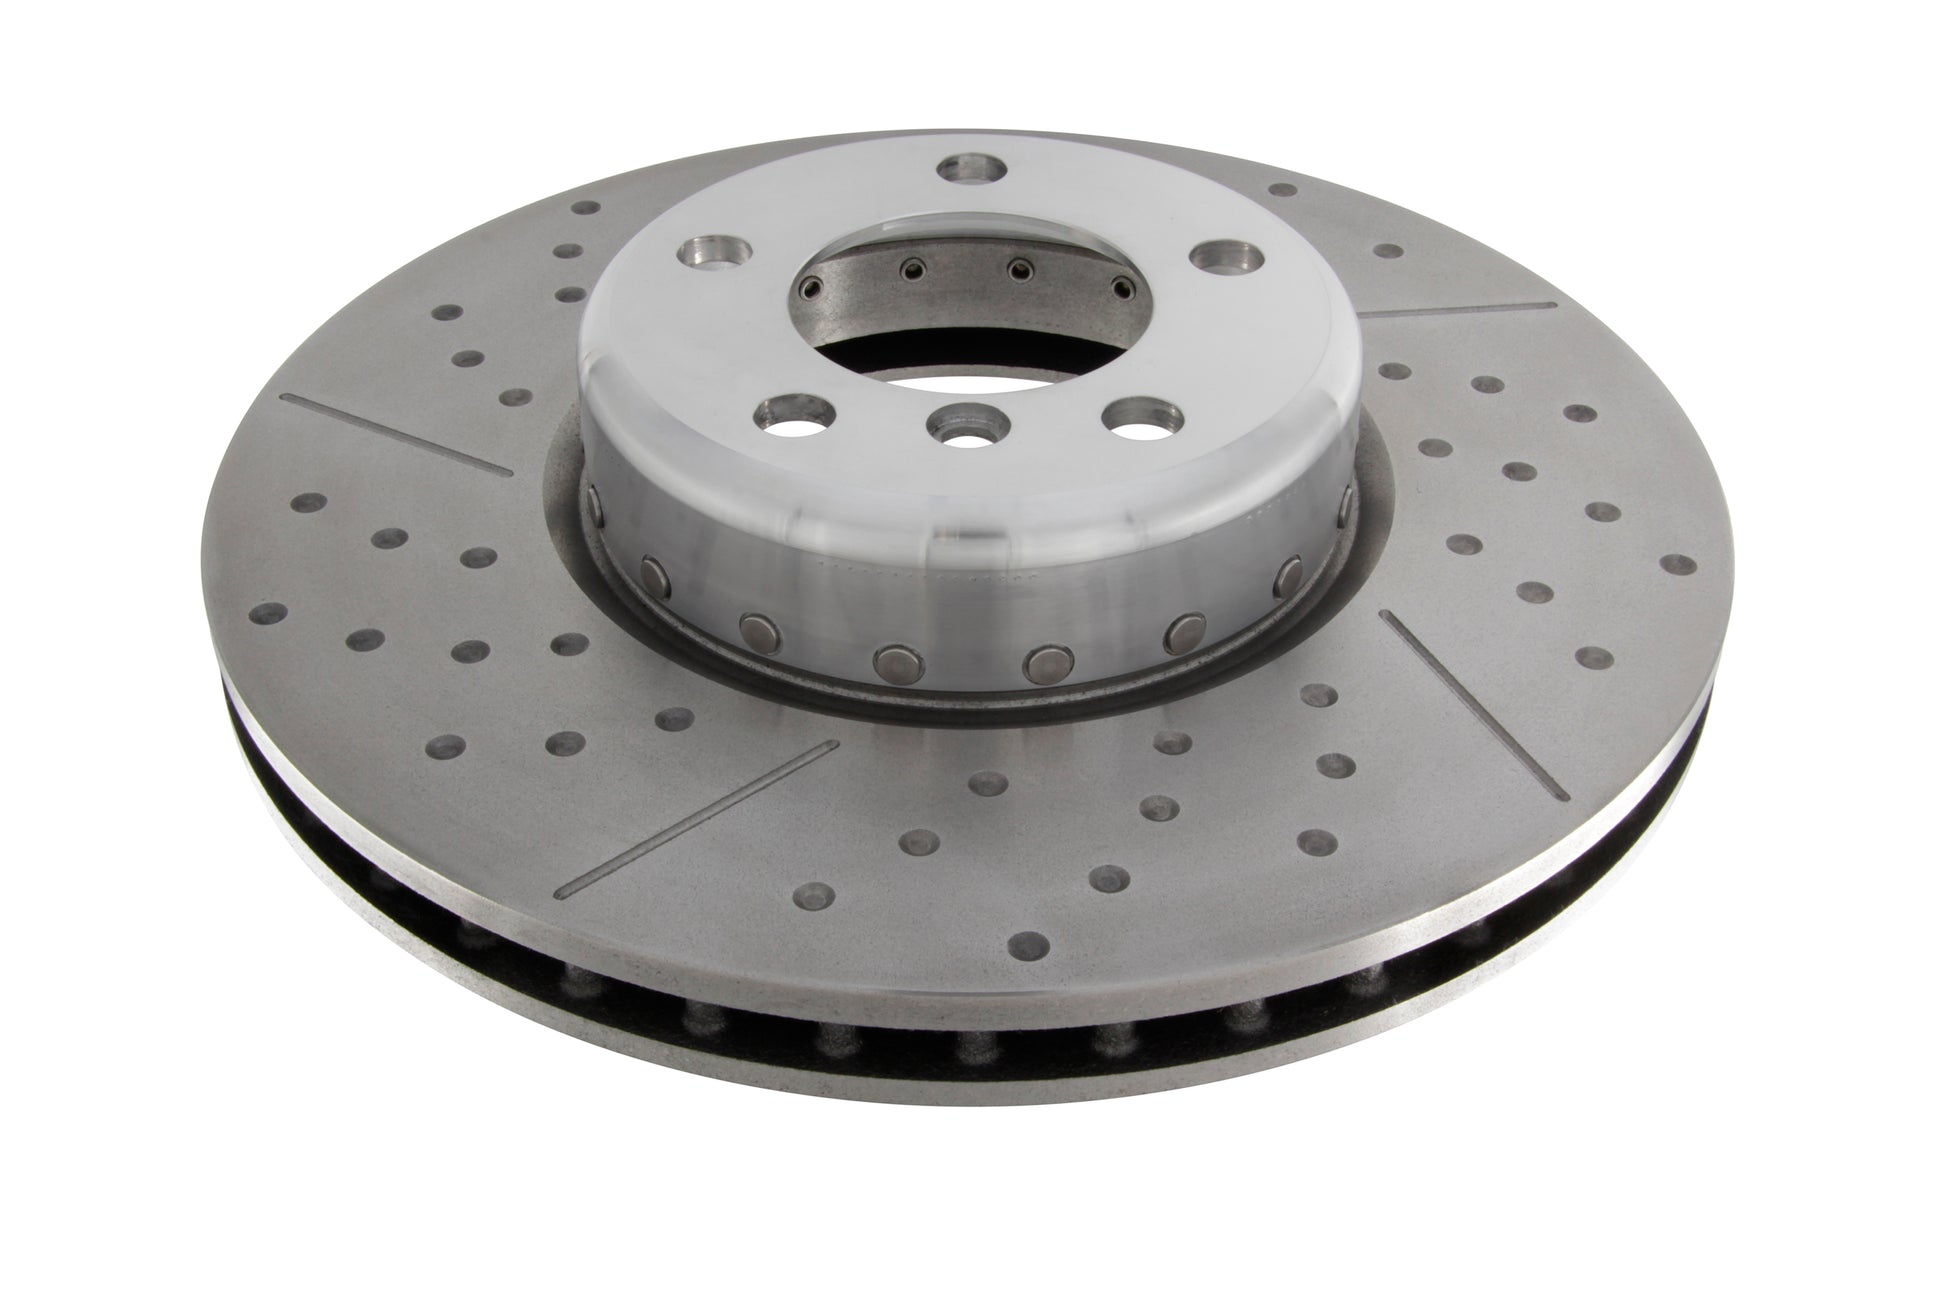 EBC BMW F20 F21 2-Piece Riveted GD Slotted & Dimple Rear Brake Discs (M135i, M140i, M235i & M240i) ML Performance UK